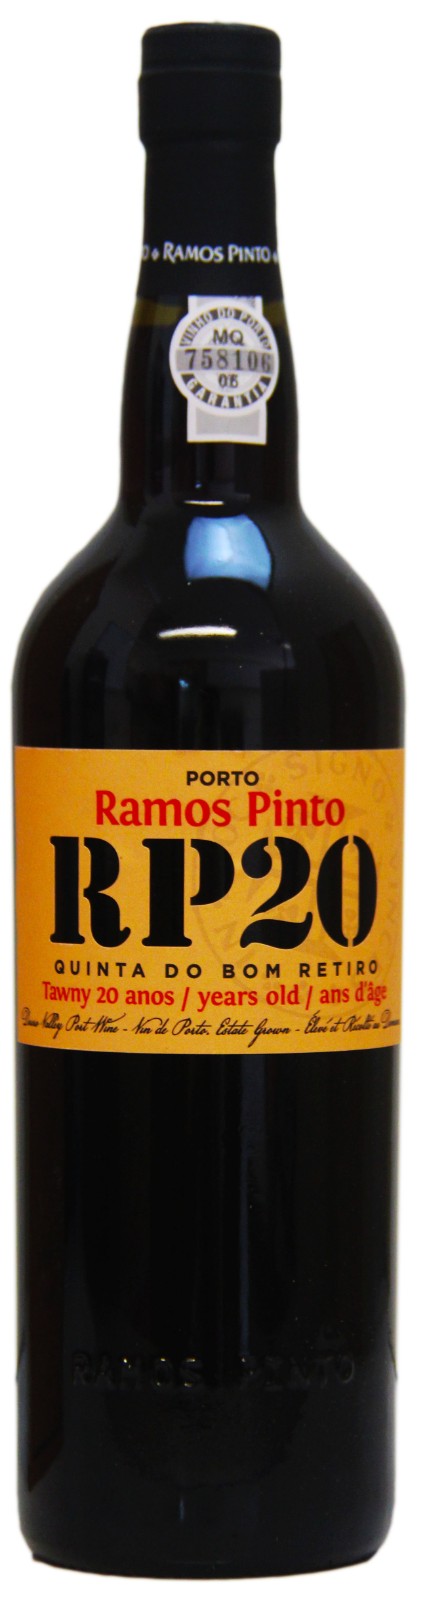 20 Year Old Ramos Pinto, 20 Year Tawny Port, 2004 | Vintage Wine and Port